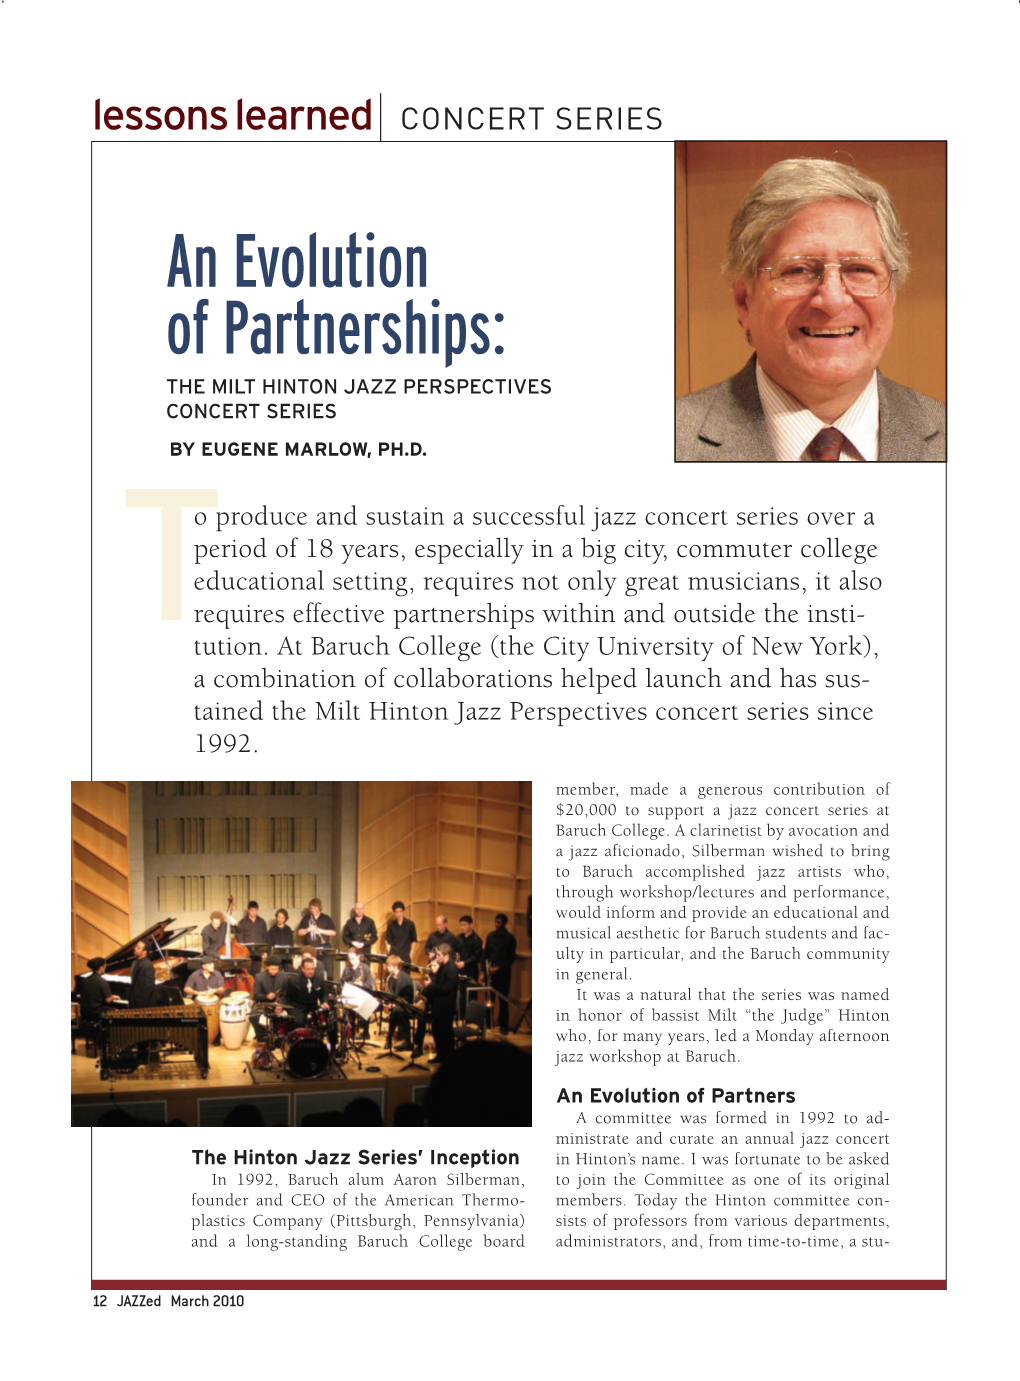 An Evolution of Partnerships: the MILT HINTON JAZZ PERSPECTIVES CONCERT SERIES by EUGENE MARLOW, PH.D